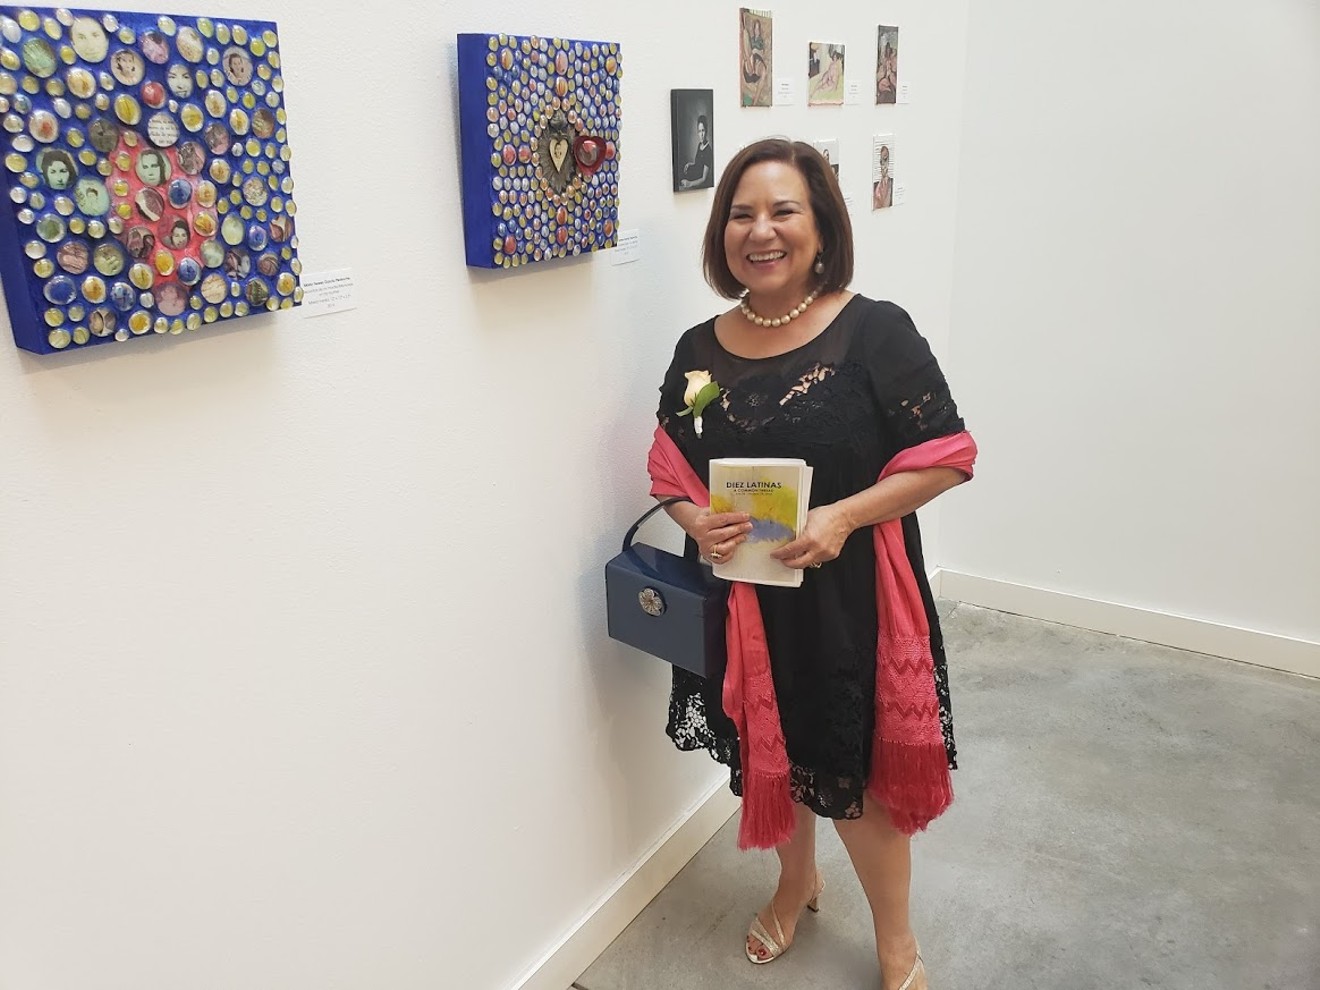 The Diez Latinas exhibition showcases the work and tells the stories of 10 Latin women.